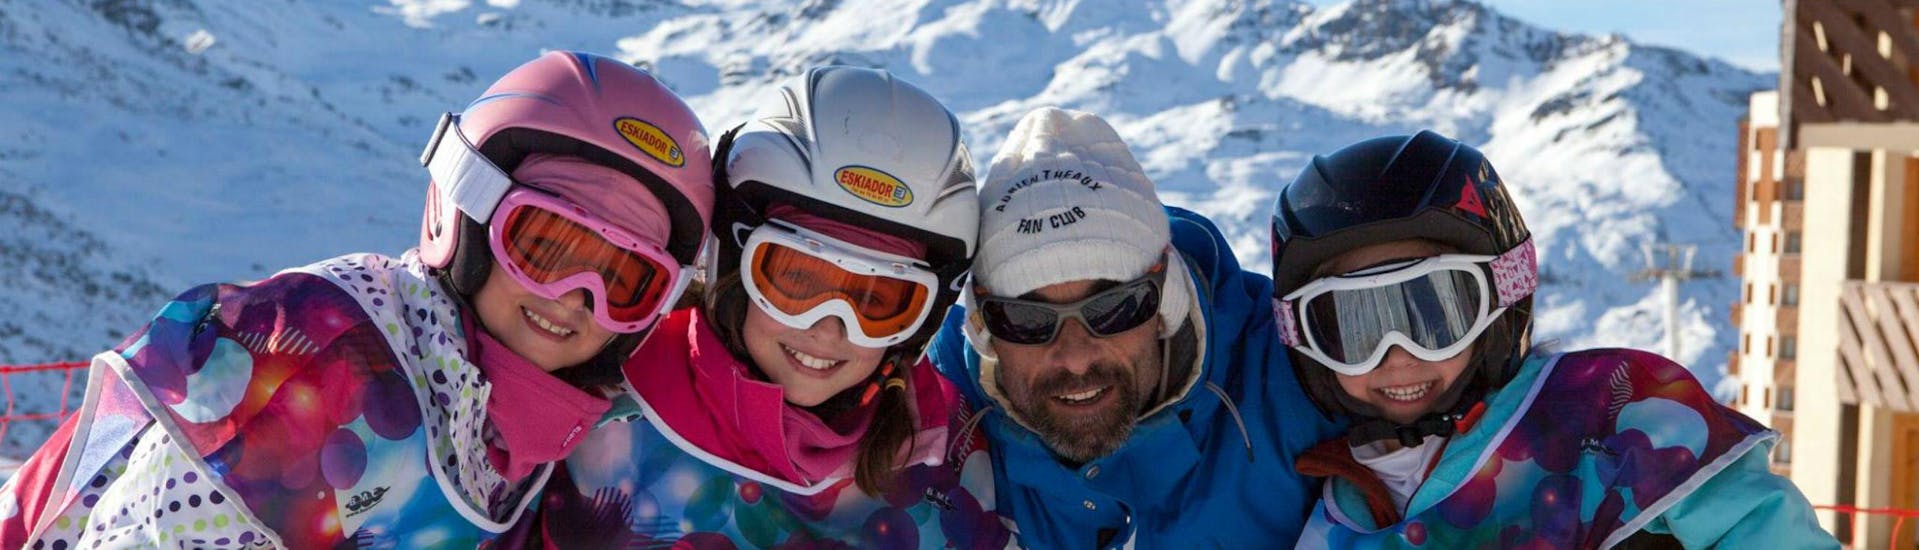 A group of children in full skiing gear are smiling at the camera together with their ski instructor from the ski school Prosneige Val Thorens & Les Menuires while preparing for their Kids Ski Lessons (5-13 years) - All Levels.